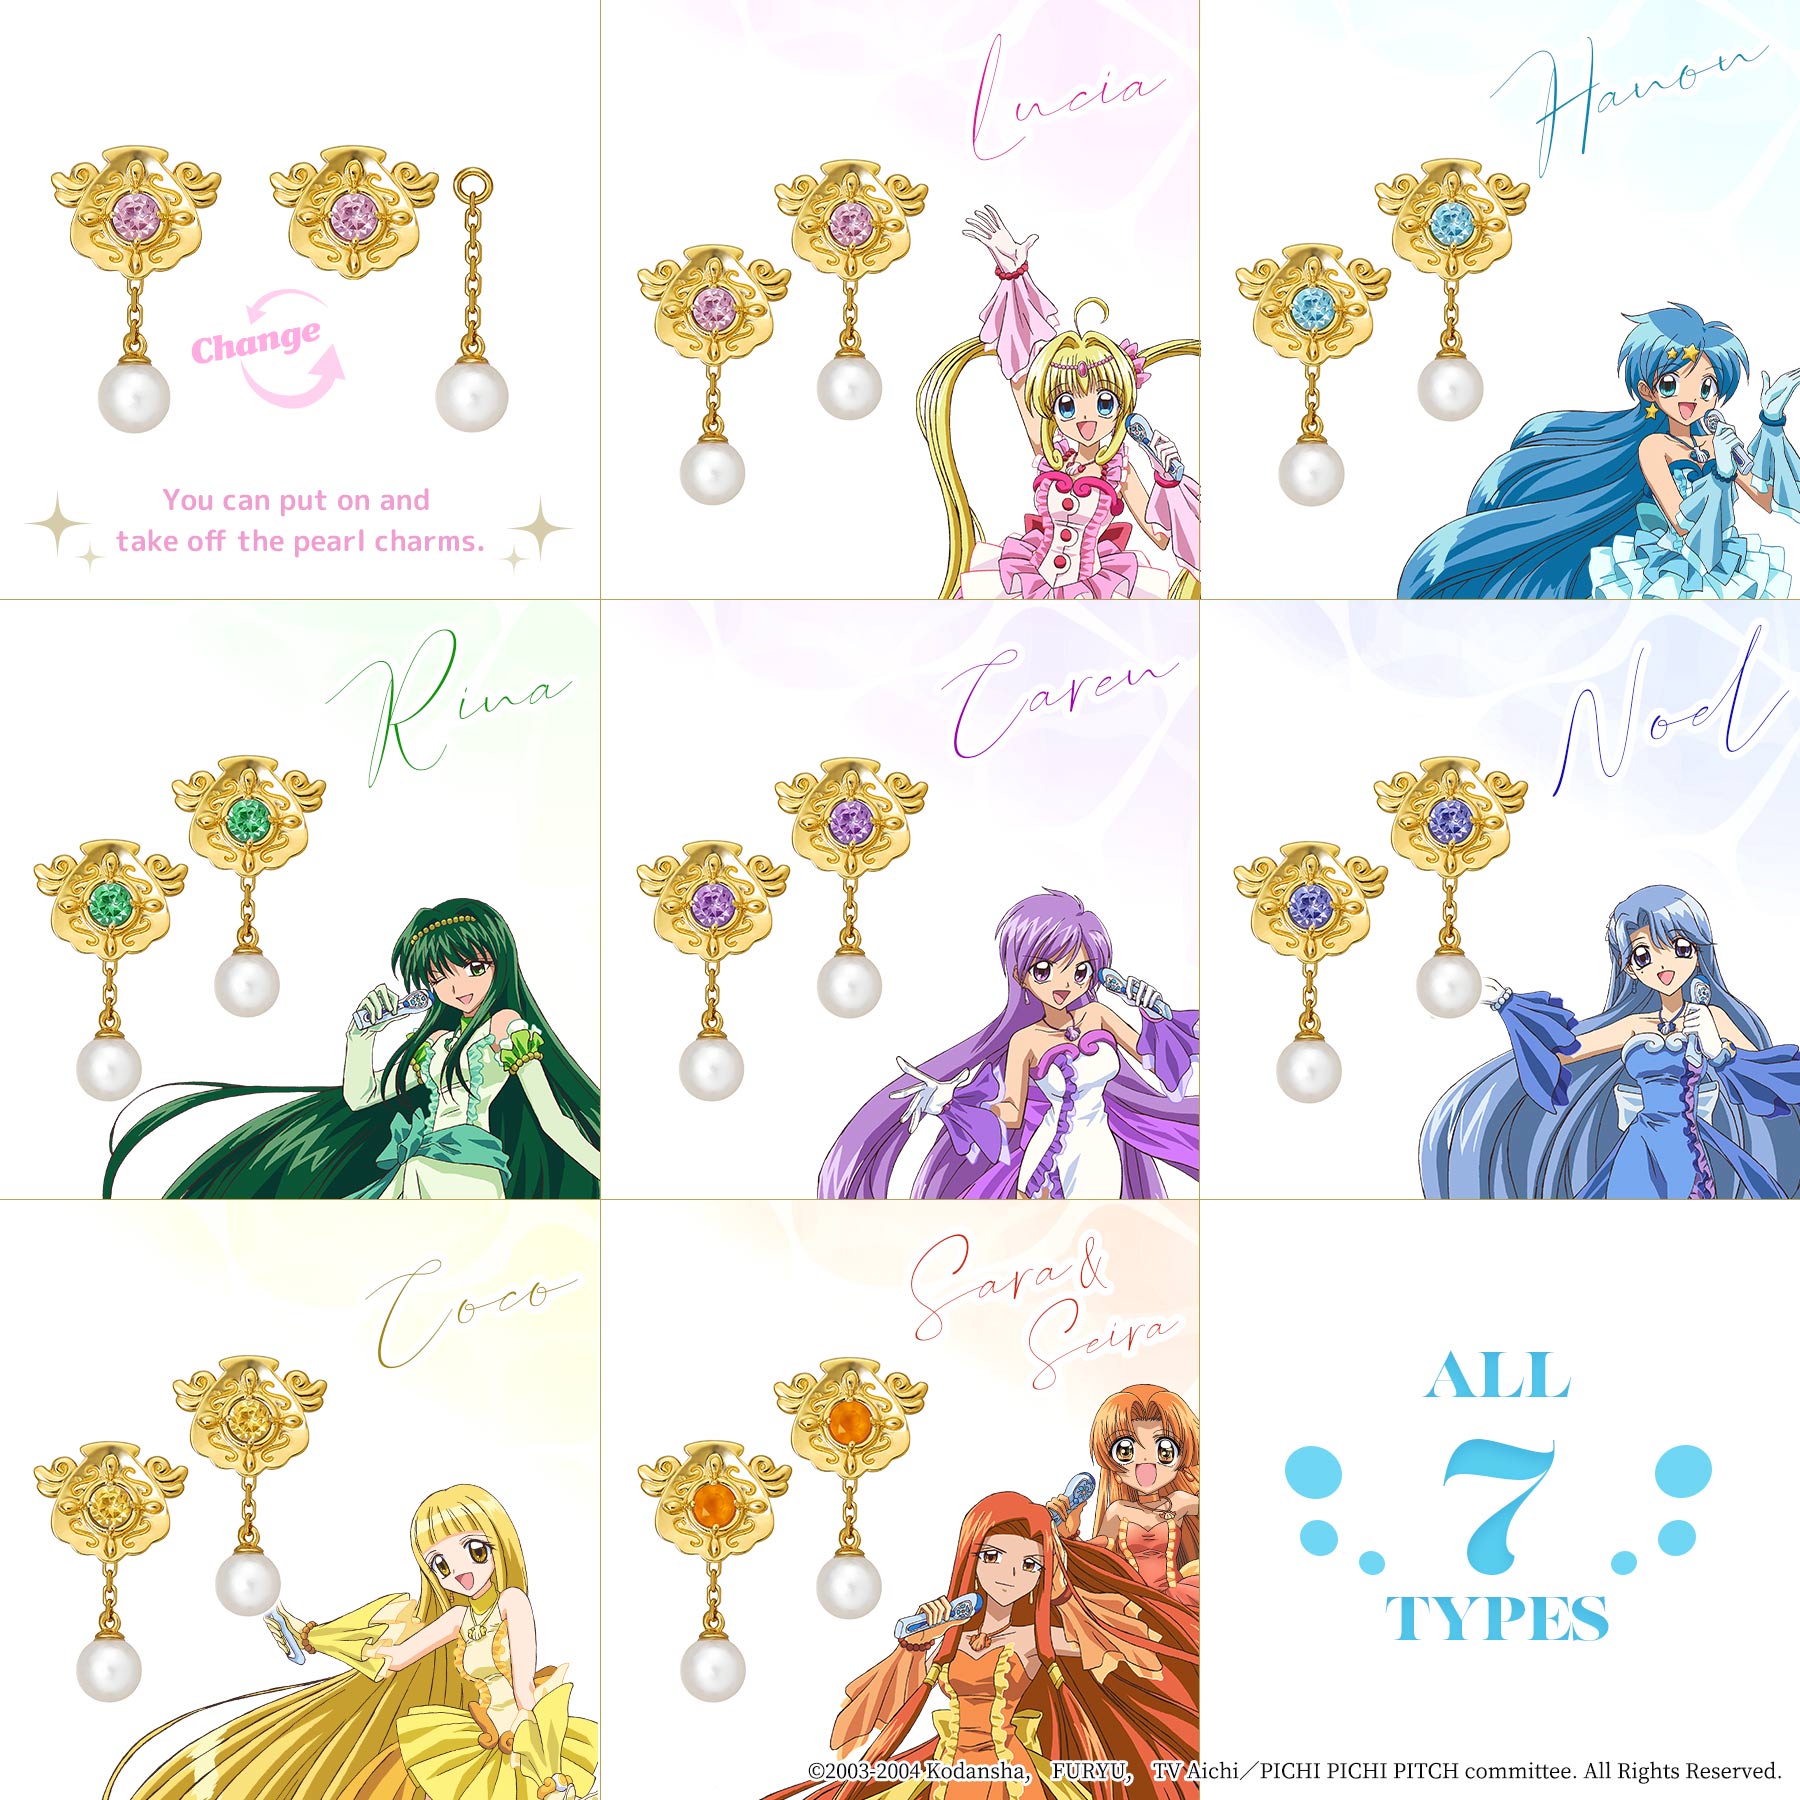 Mermaid Melody Pichi Pichi Pitch - 2WAY Earrings (Rina Toin) - All Characters